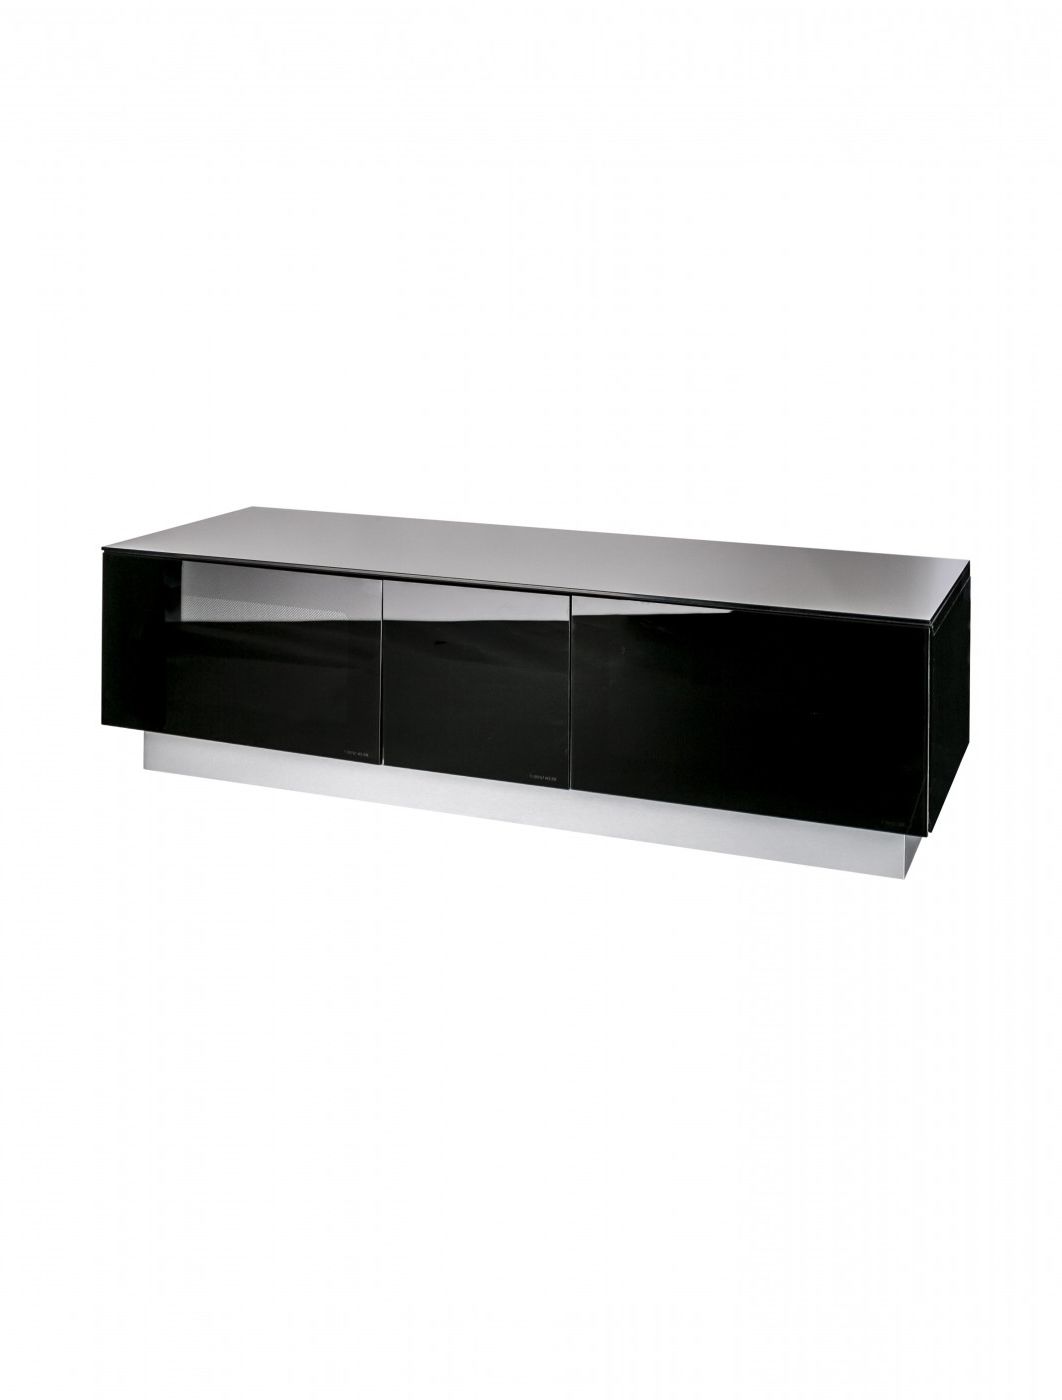 Tv Stand Element Modular Emtmod1250 Blk Tv Cabinet Pertaining To 57&#039;&#039; Tv Stands With Open Glass Shelves Gray &amp; Black Finsh (View 17 of 20)